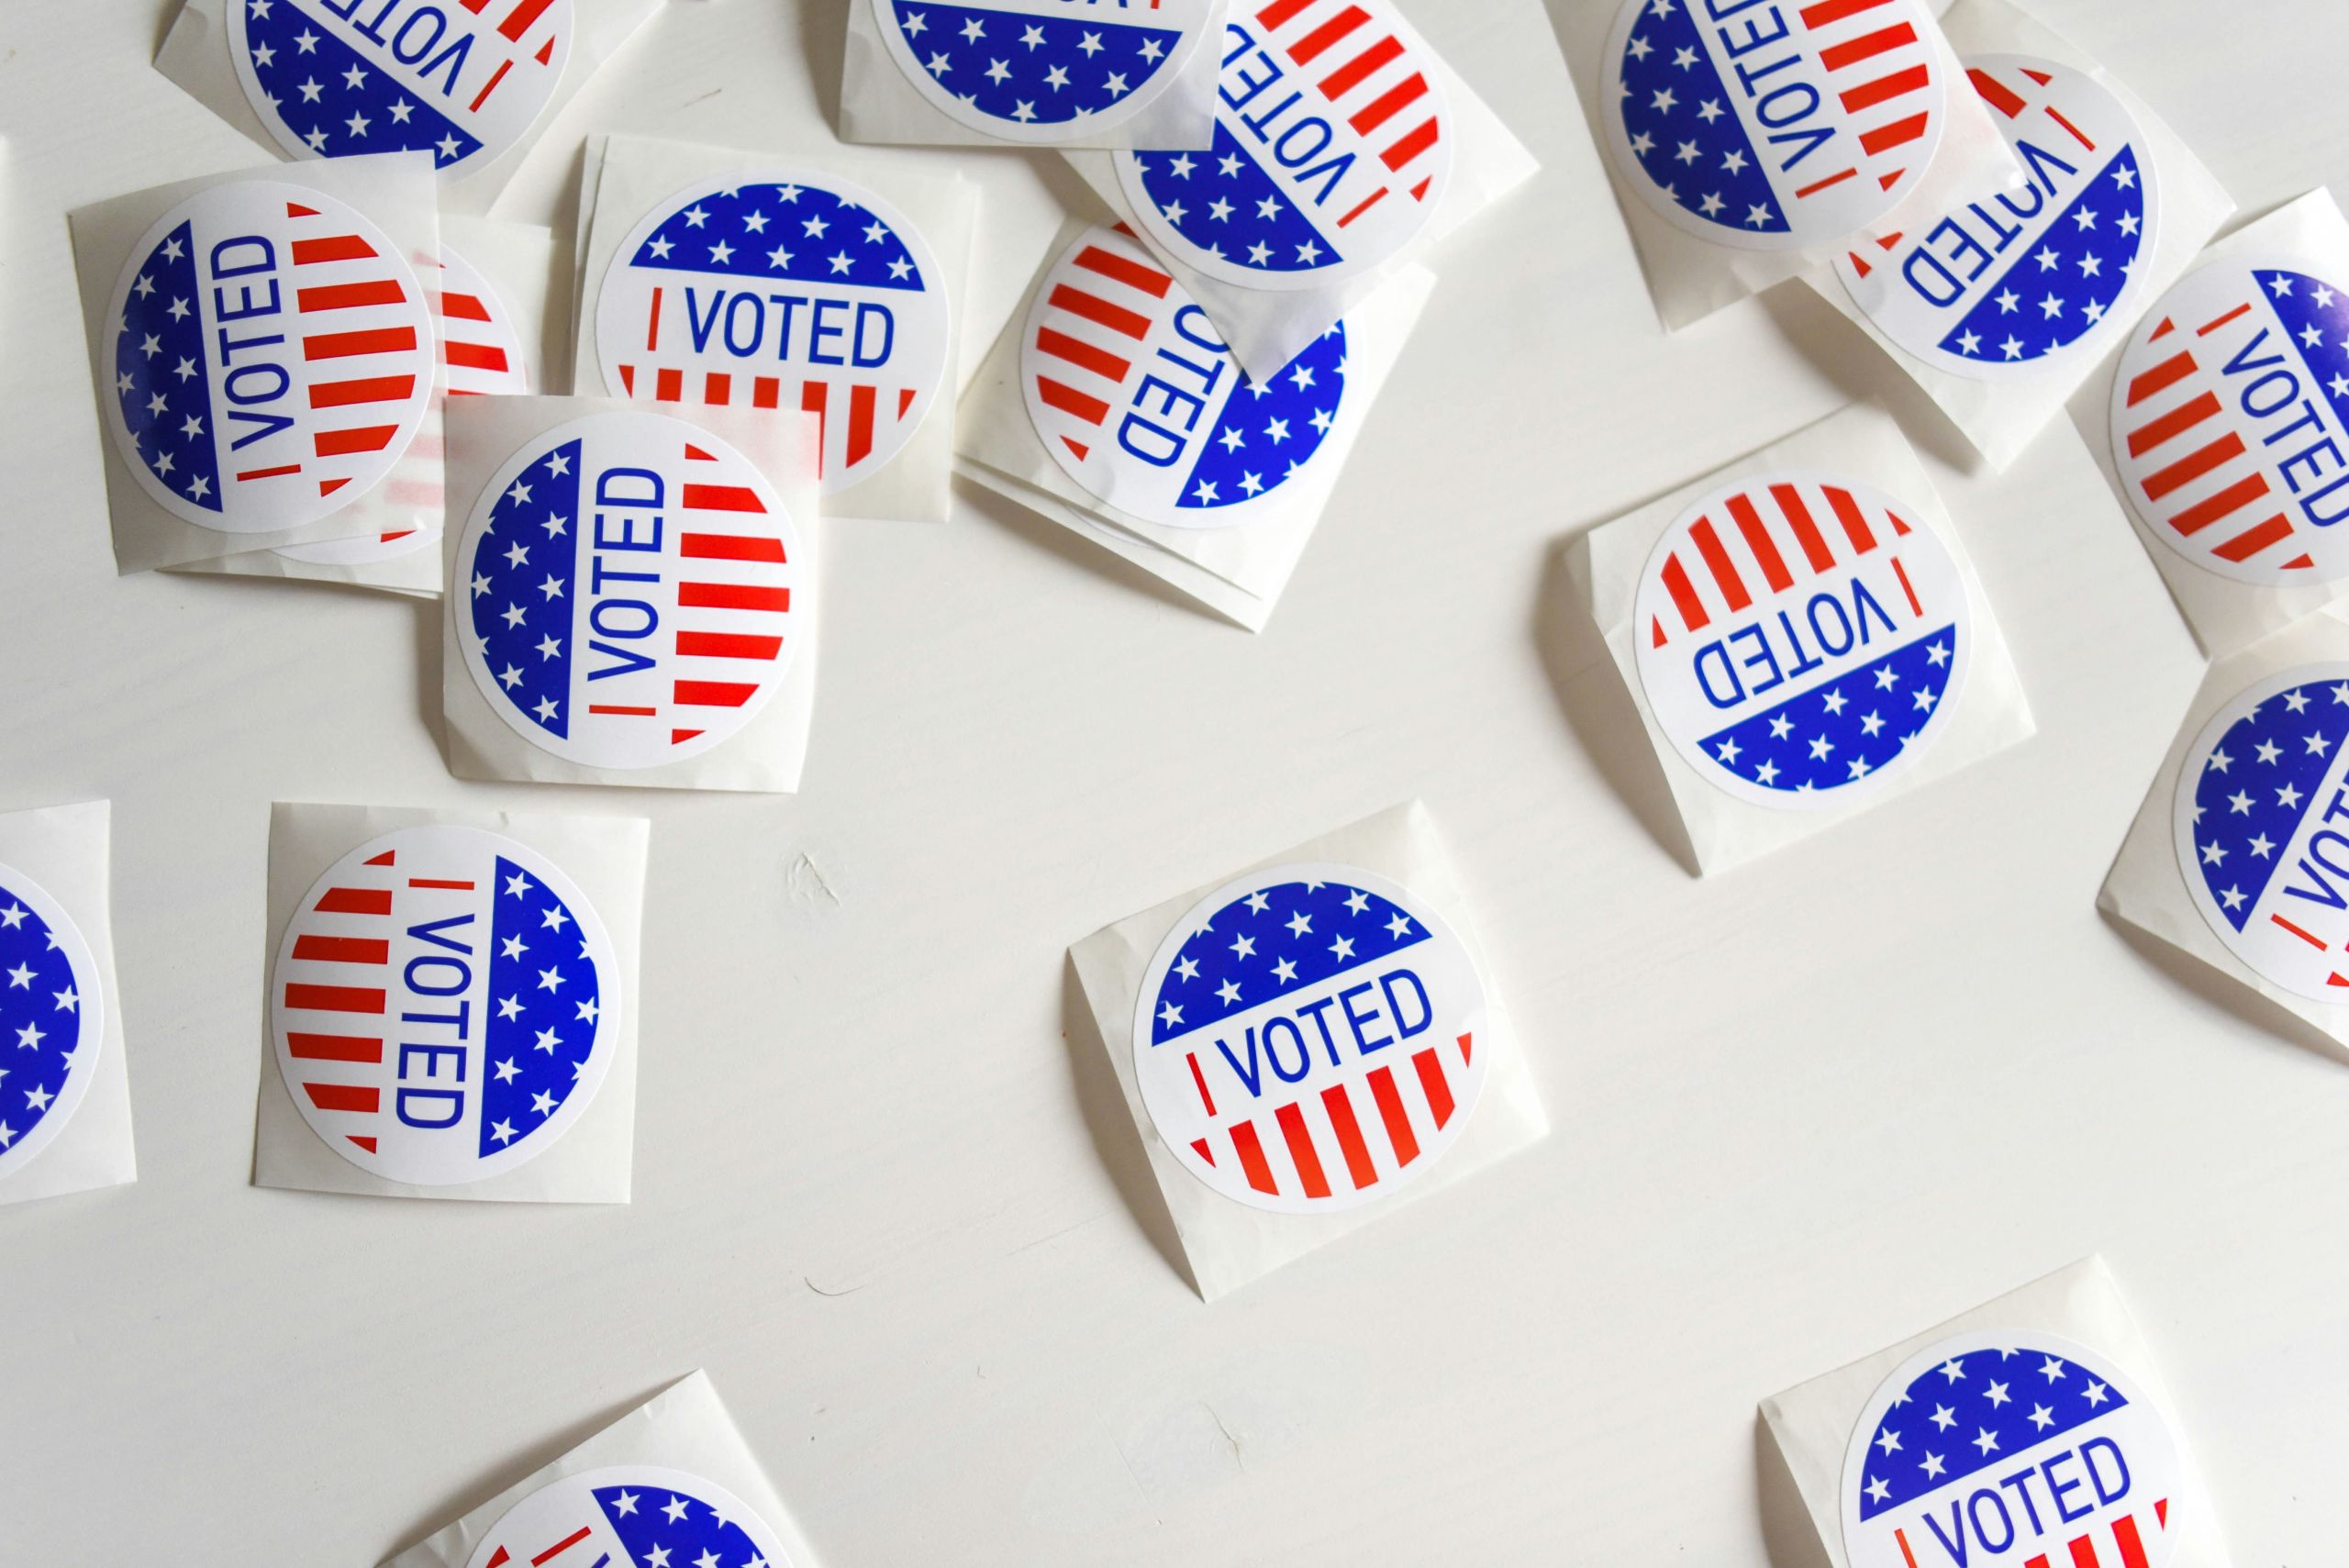 Generally, voter turnout is not high for primary elections compared to general elections. Photo by Element5 Digital via Unsplash. 